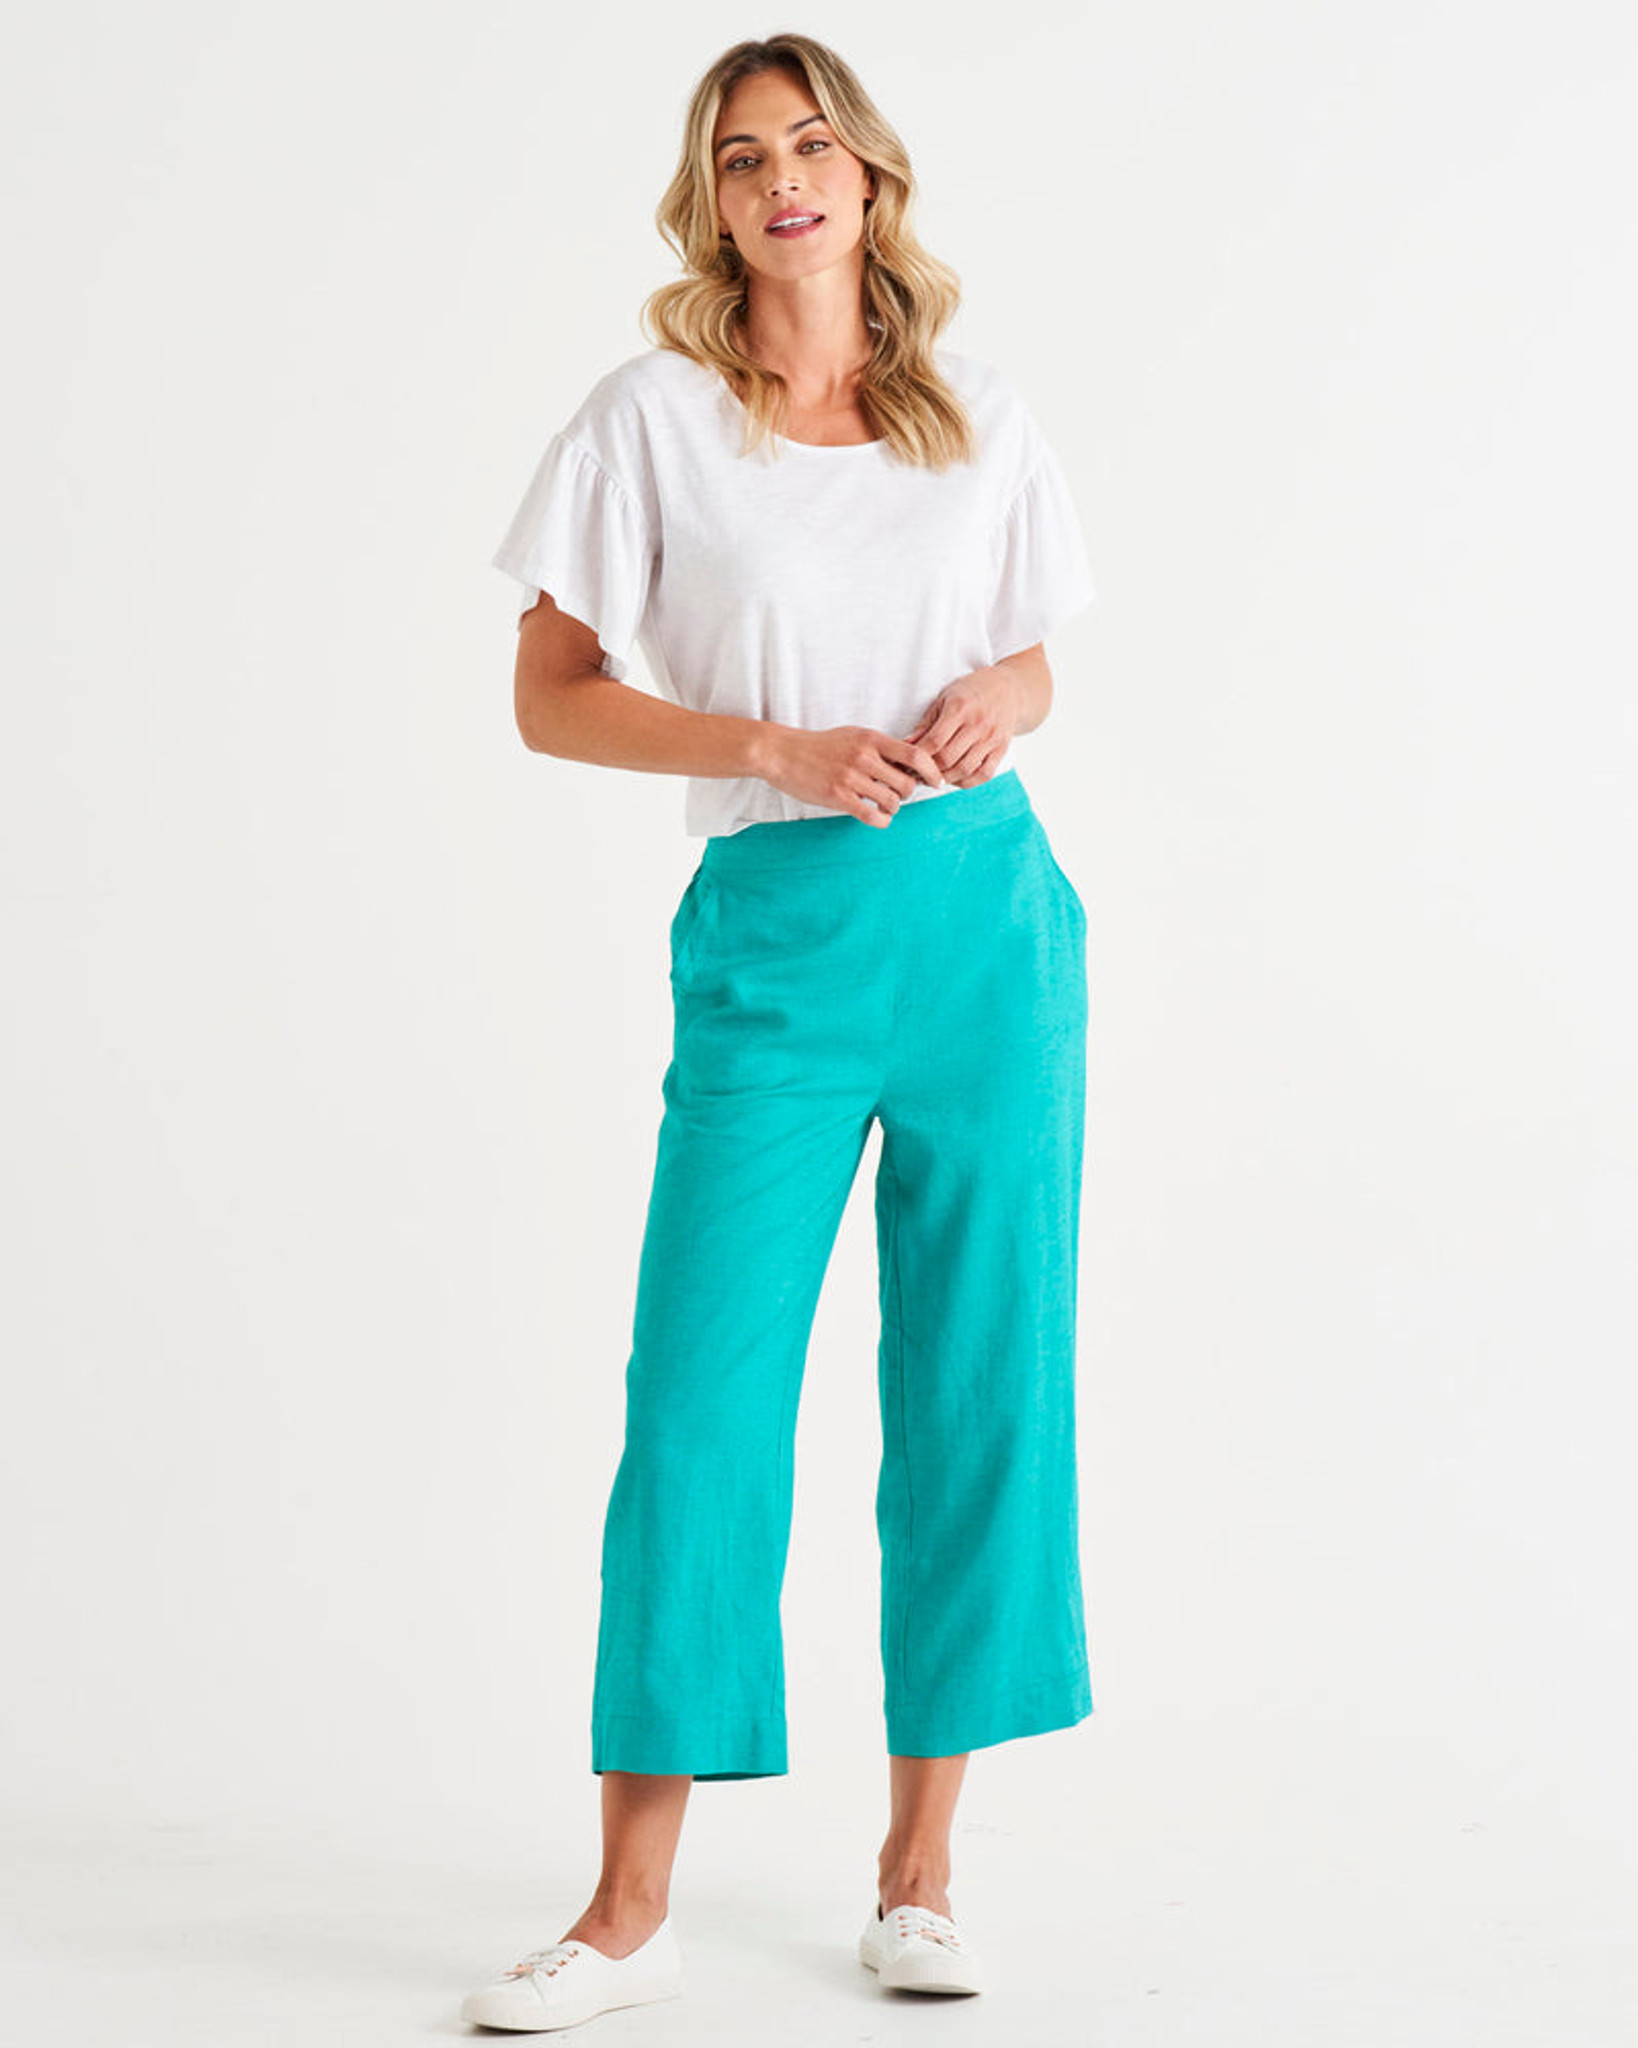 The Guide For Every Woman To Get Some Basic Pants In Closest?